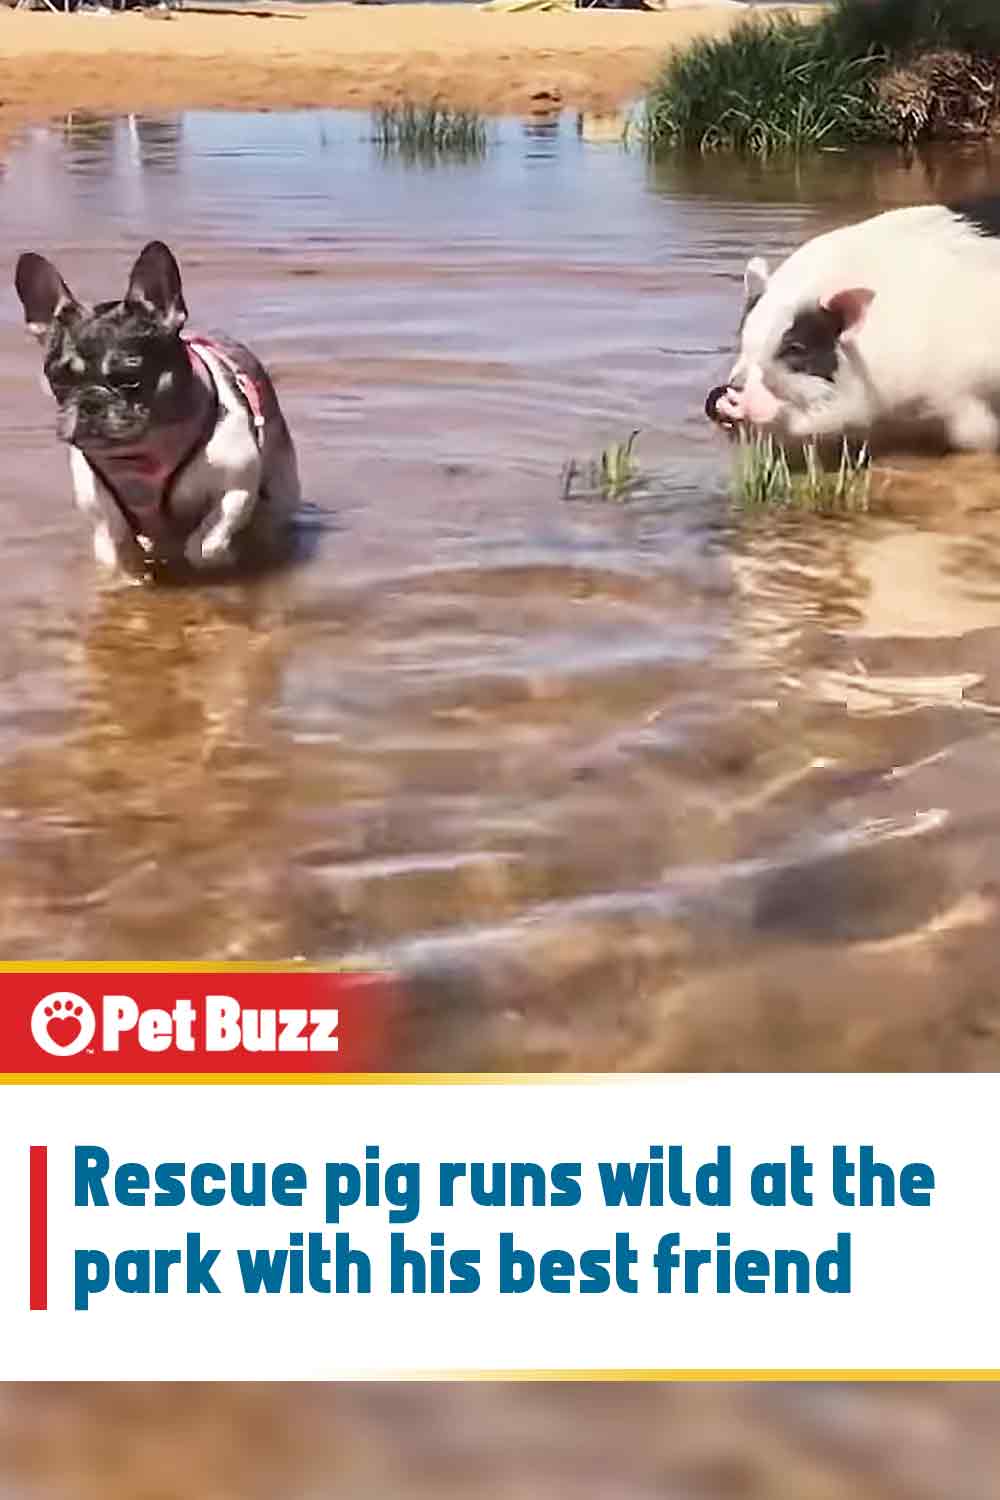 Rescue pig runs wild at the park with his best friend